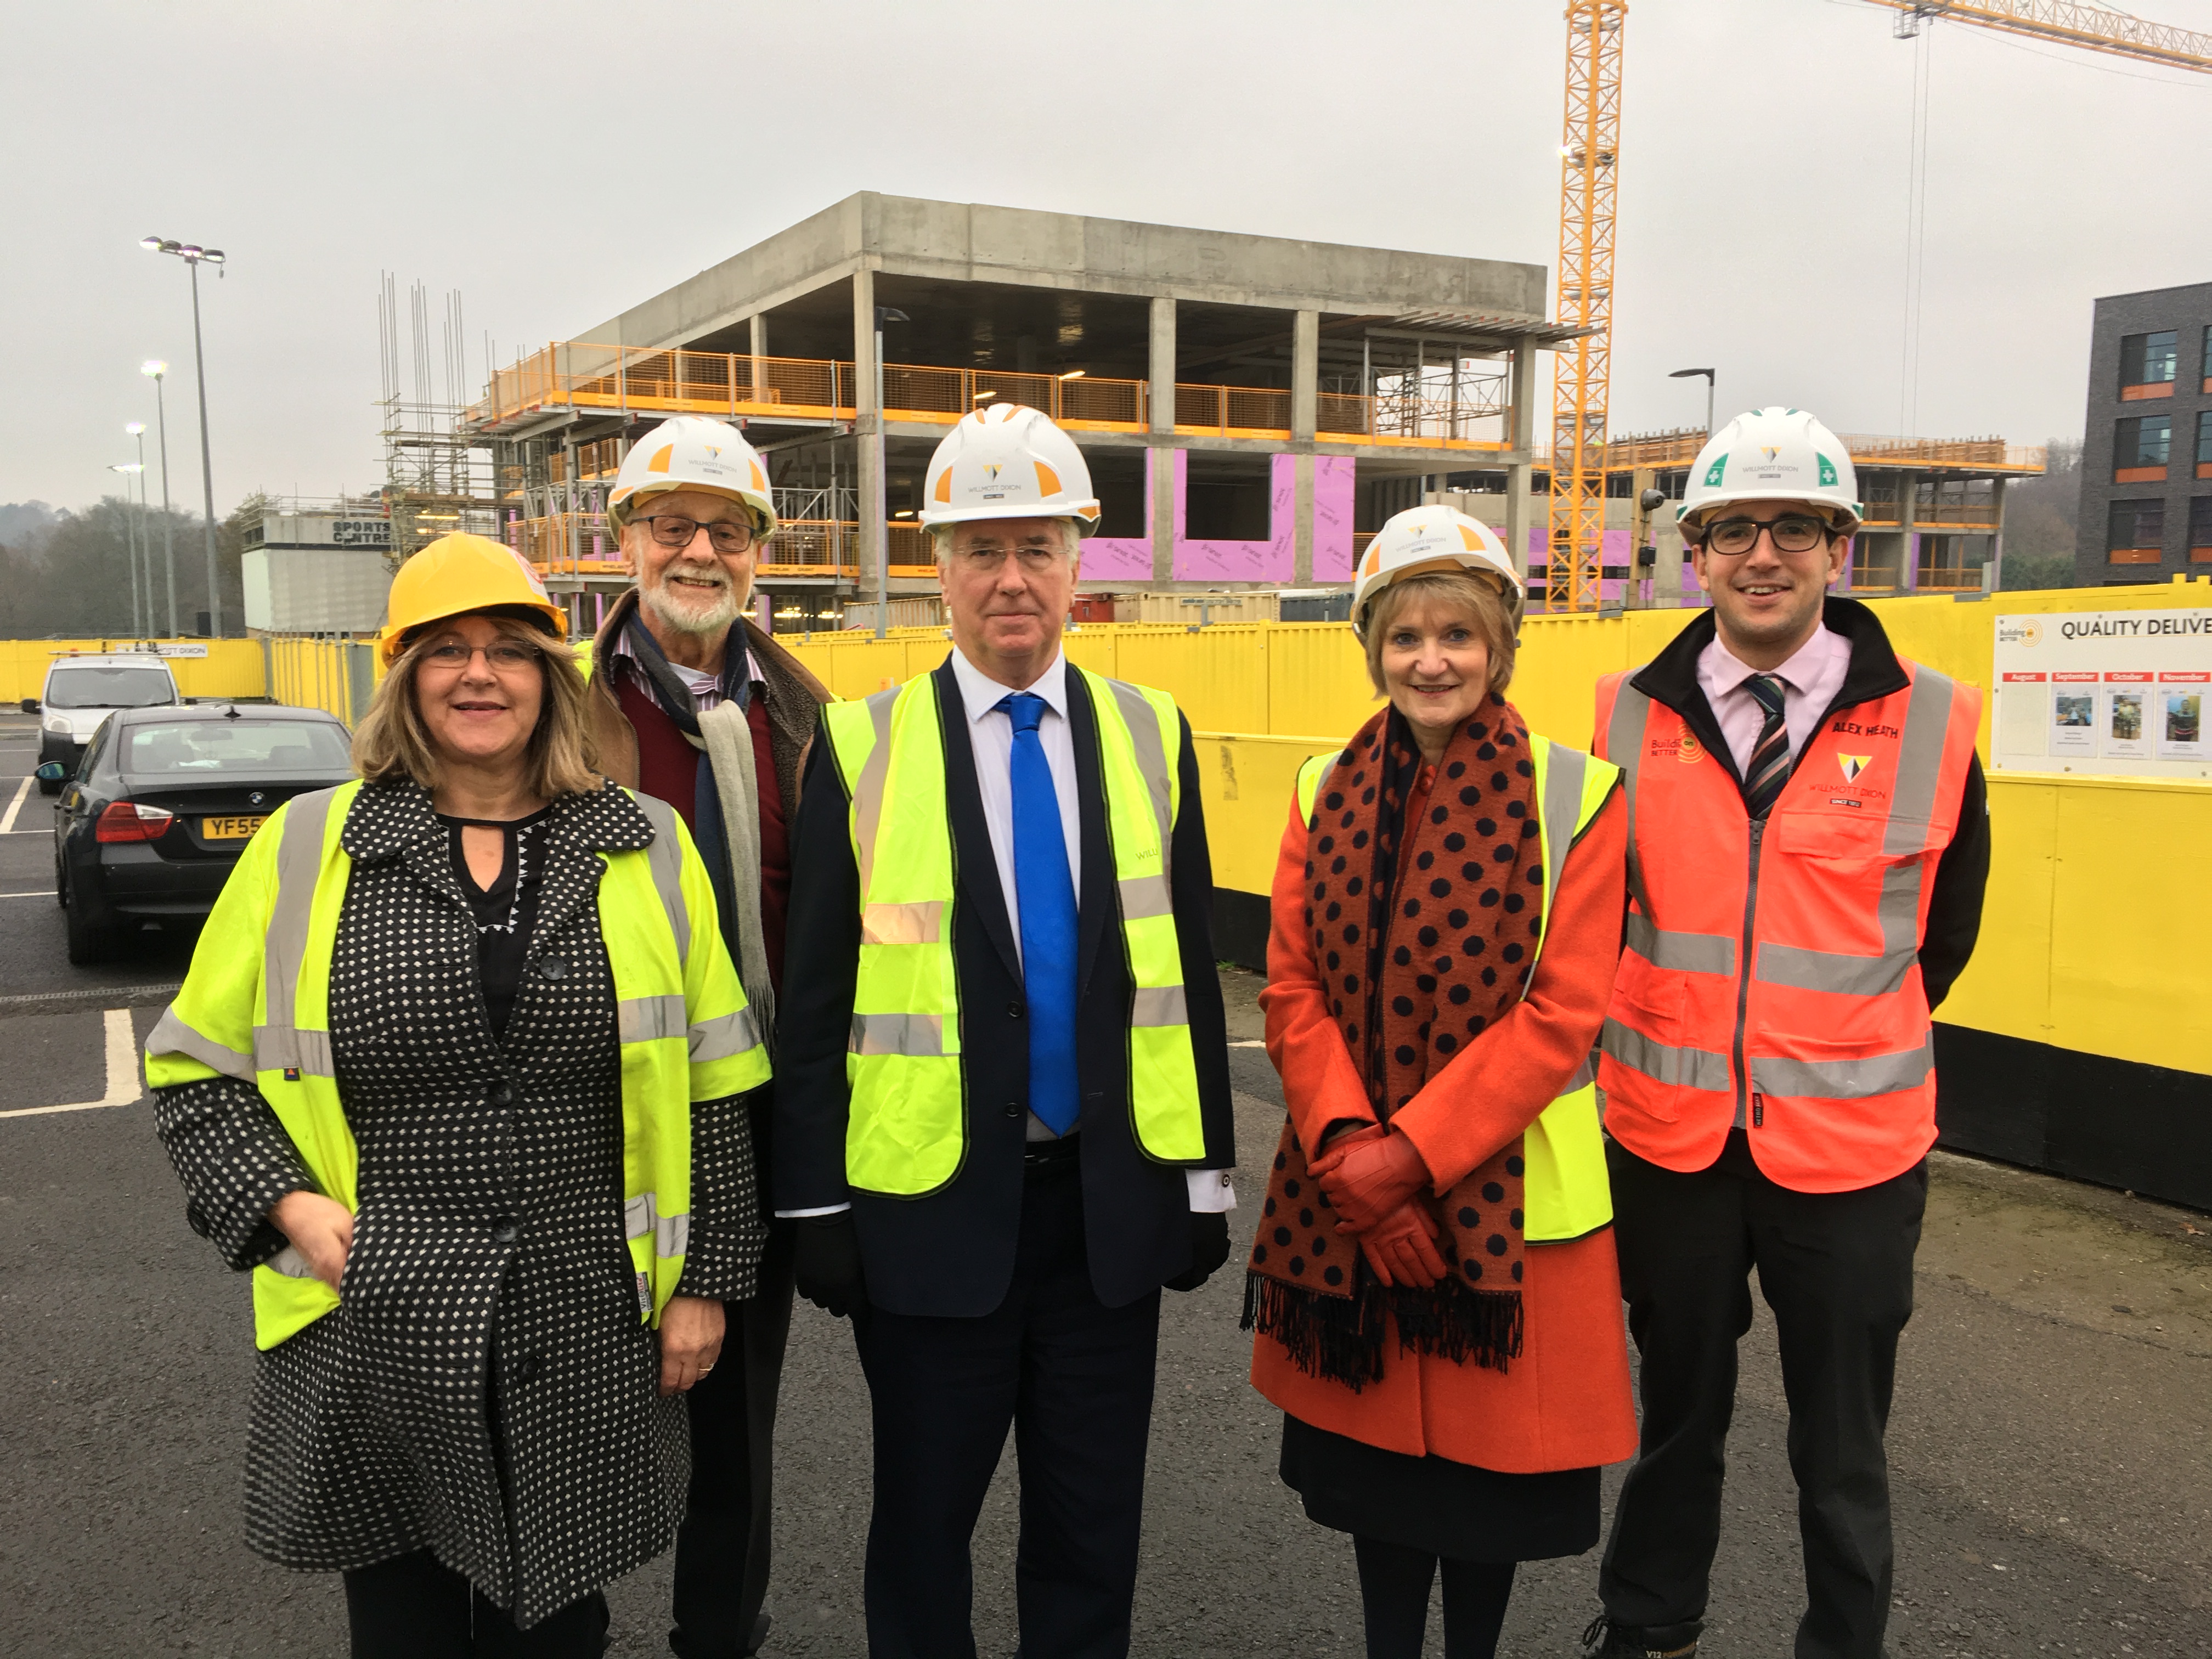 Michael with KCC Project Manager Esther Larner, Weald of Kent Chair of Governors David Bower, Weald of Kent Headteacher Maureen Johnson, and Willmott Dixon Build Manager Alex Heath